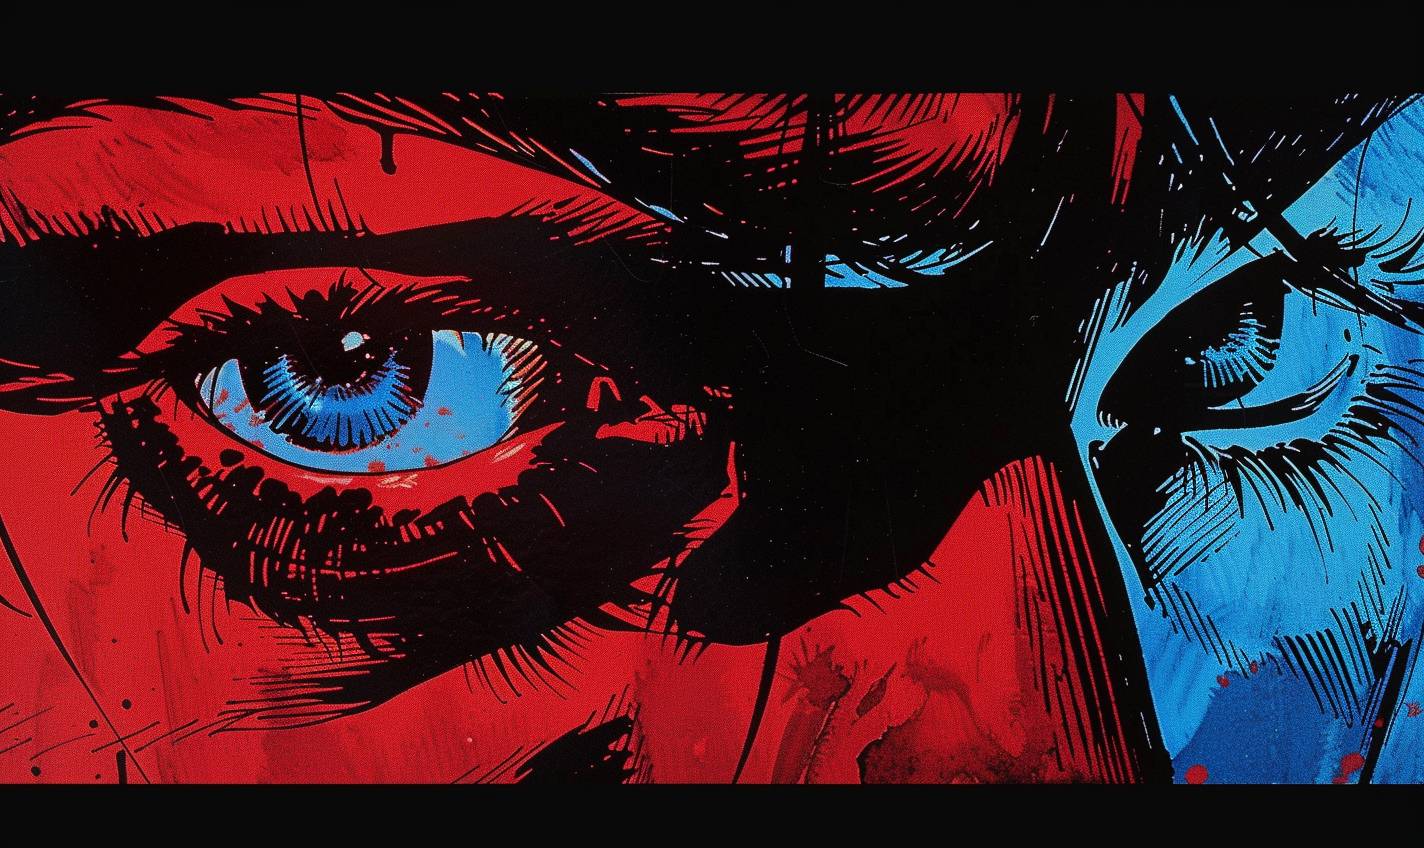 Dark and dramatic close-up manga comic-strip illustration by Frank Miller. Red and blue hues